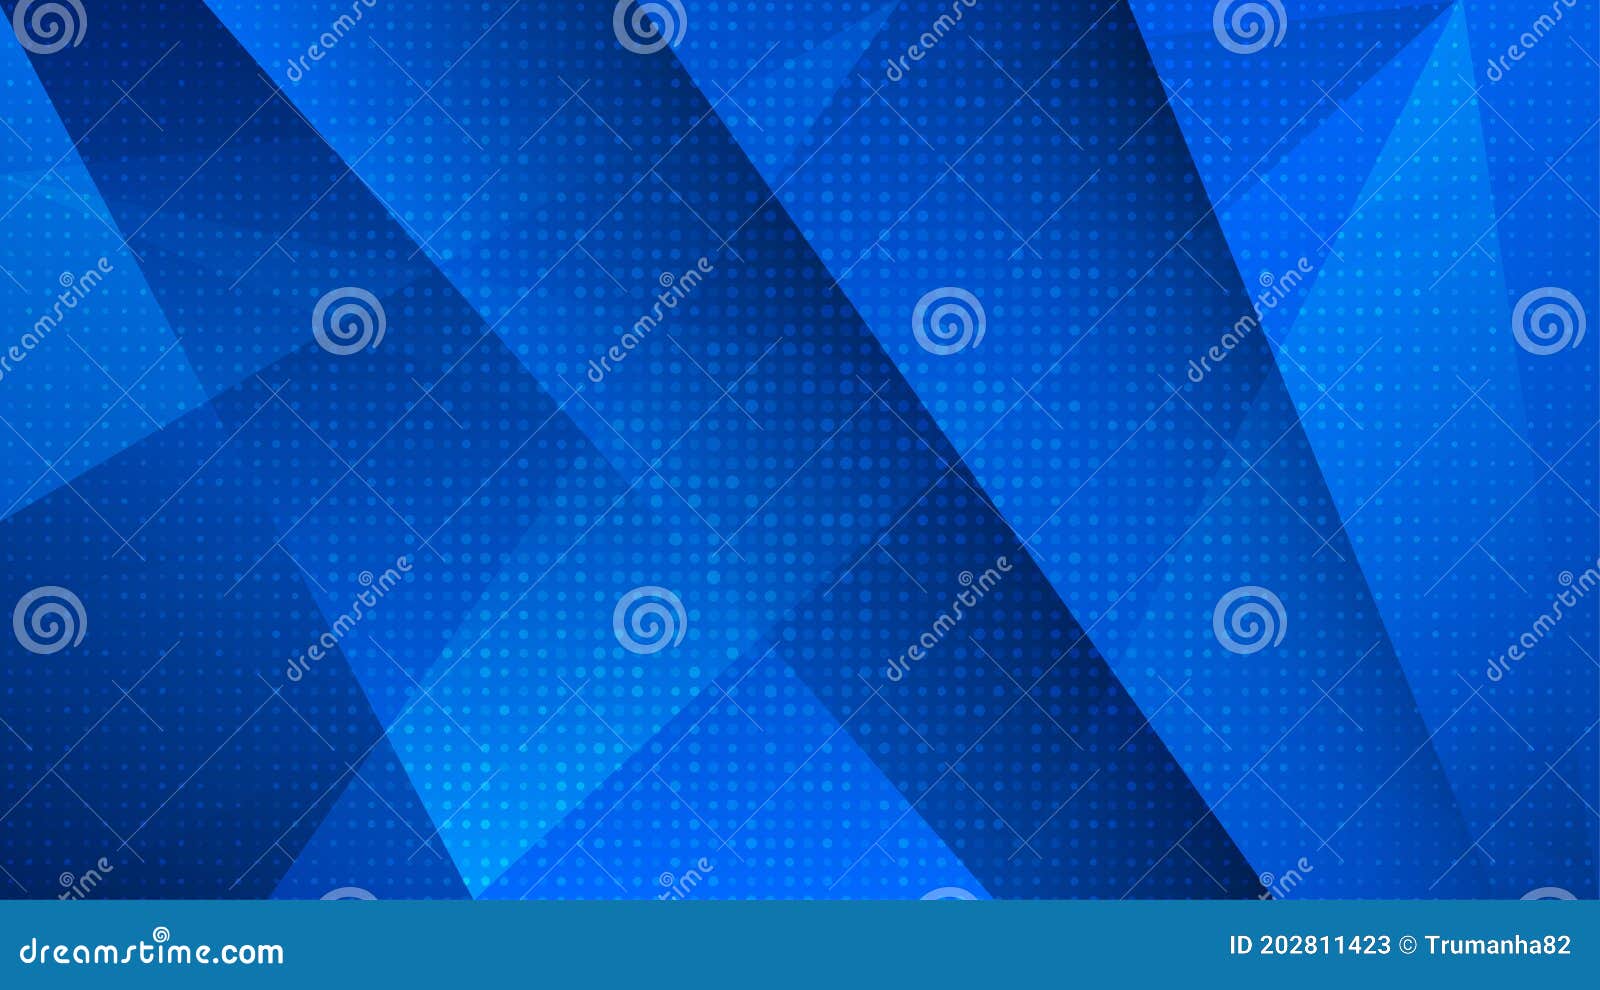  blue geometric background with polygons and halftone dots texture